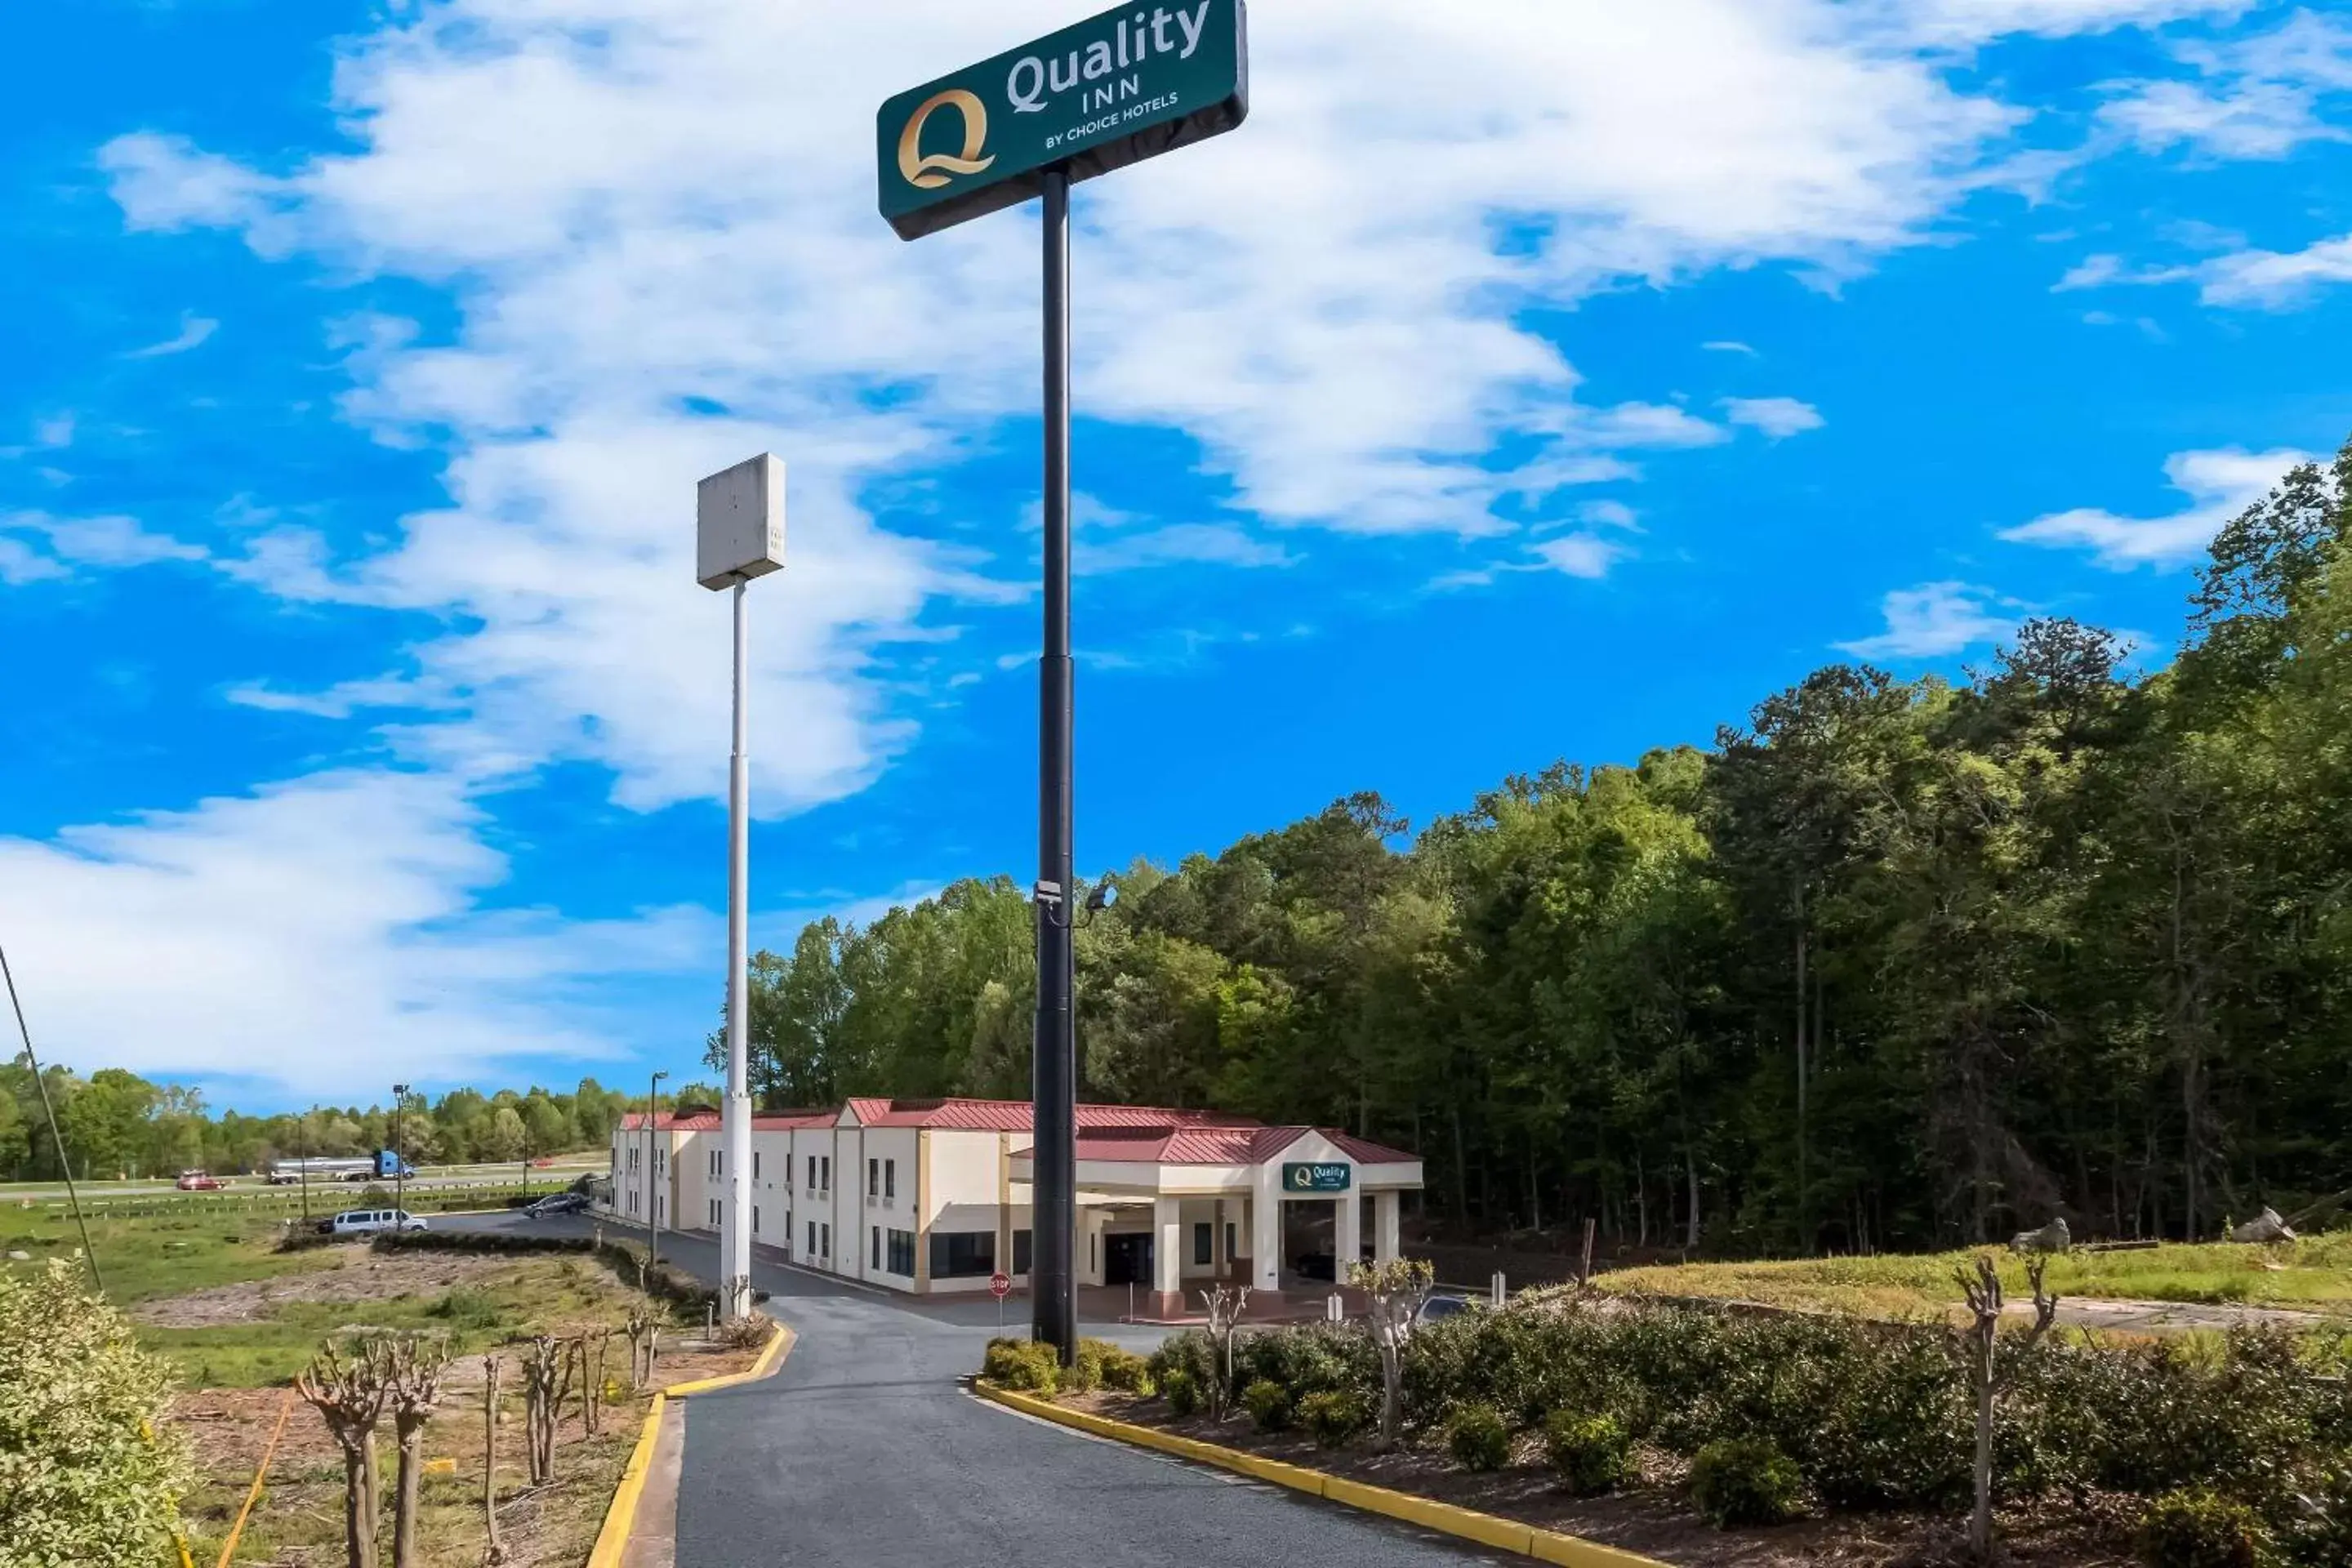 Property building in Quality Inn Jefferson at I-85